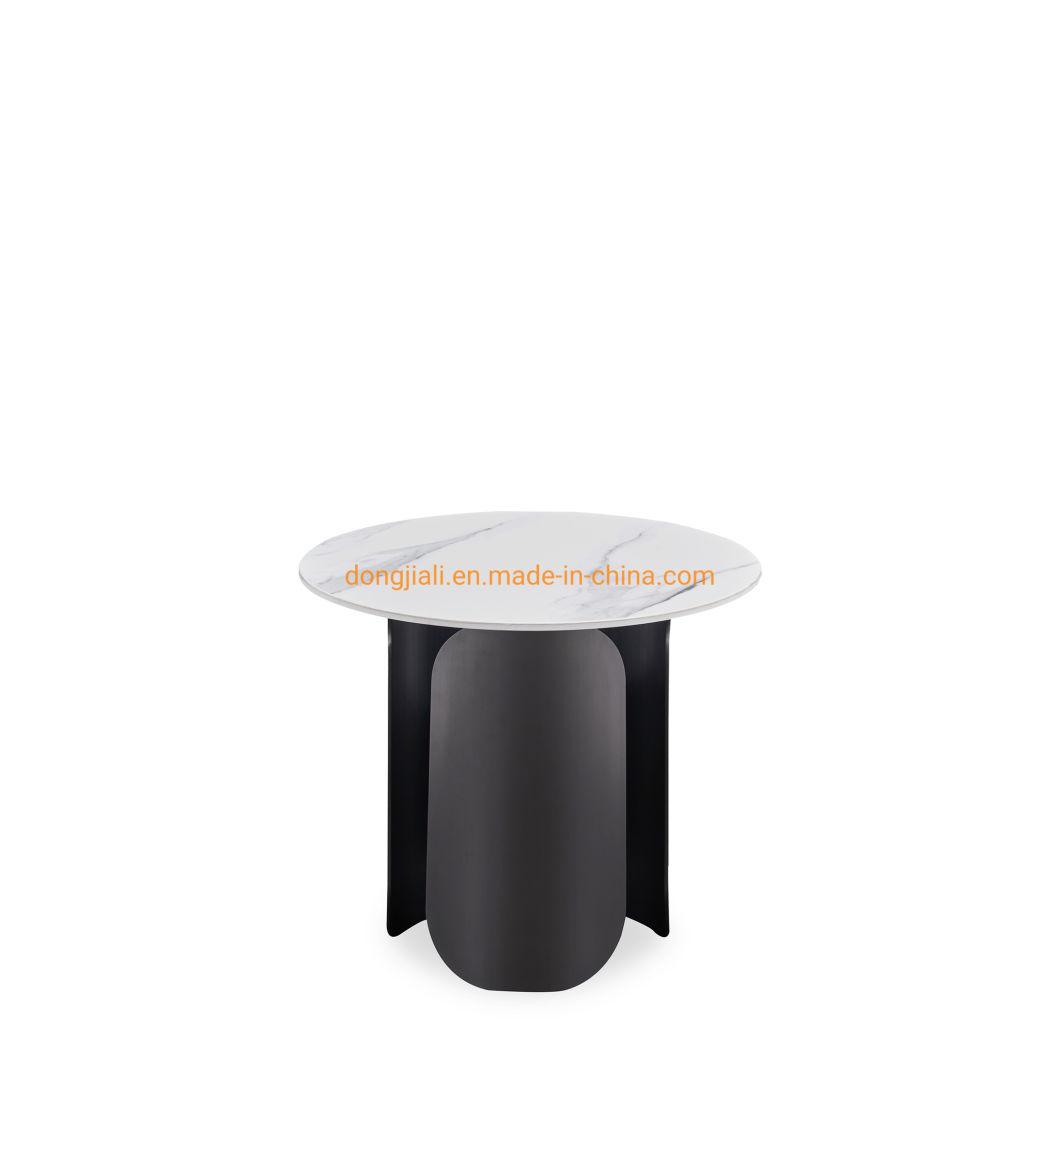 Modern Round Home Furniture with Coffee Table Black Chrome Metal Frame